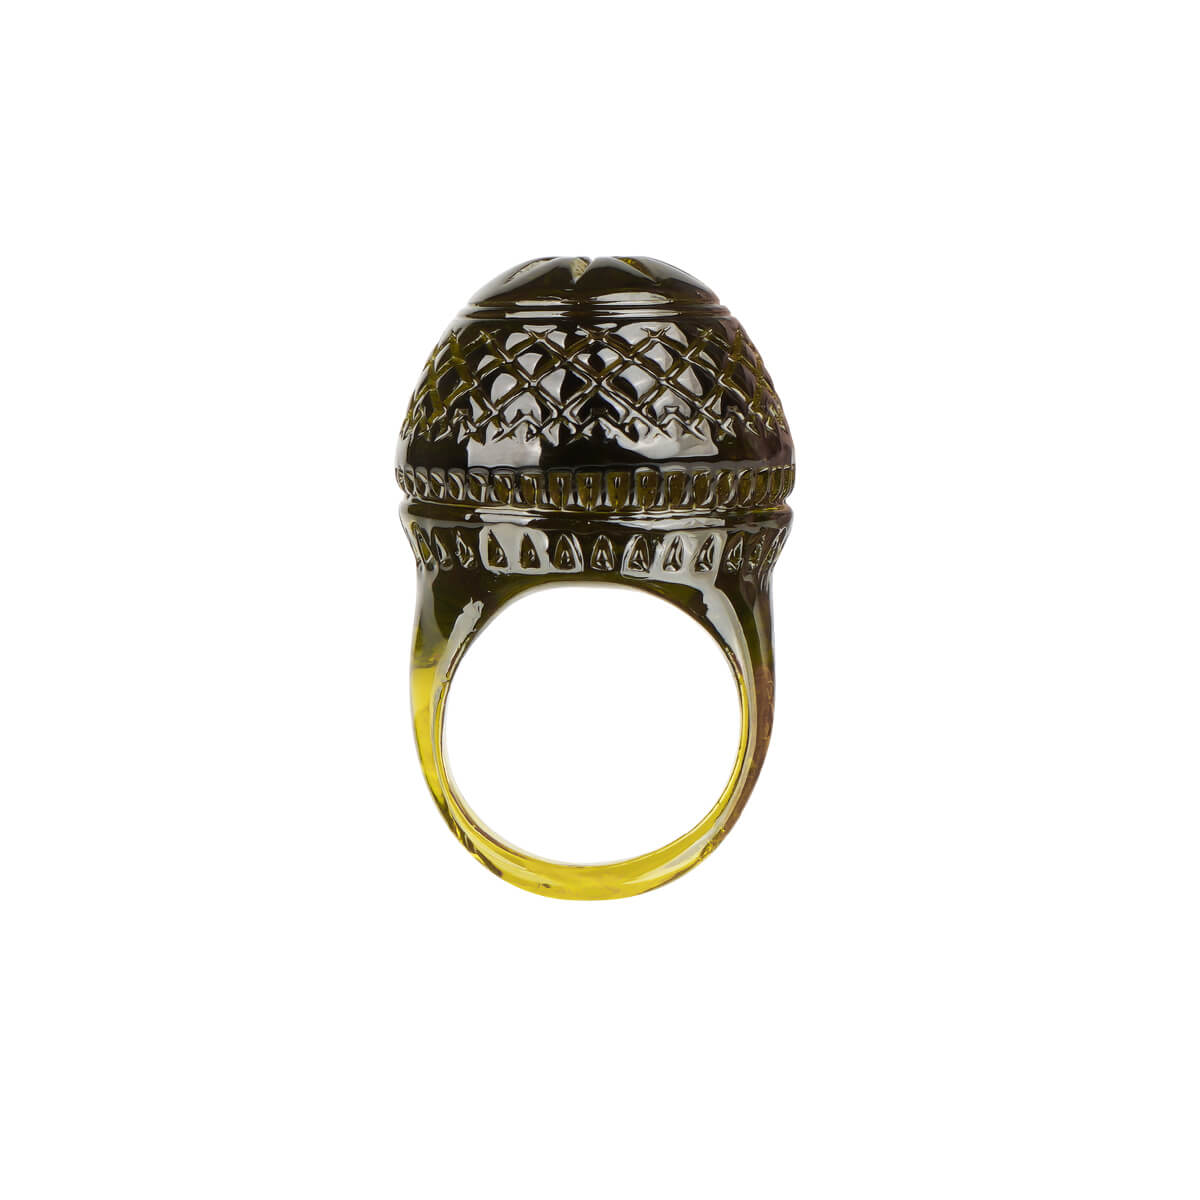 NEW IN Etched Dome Ring Olive